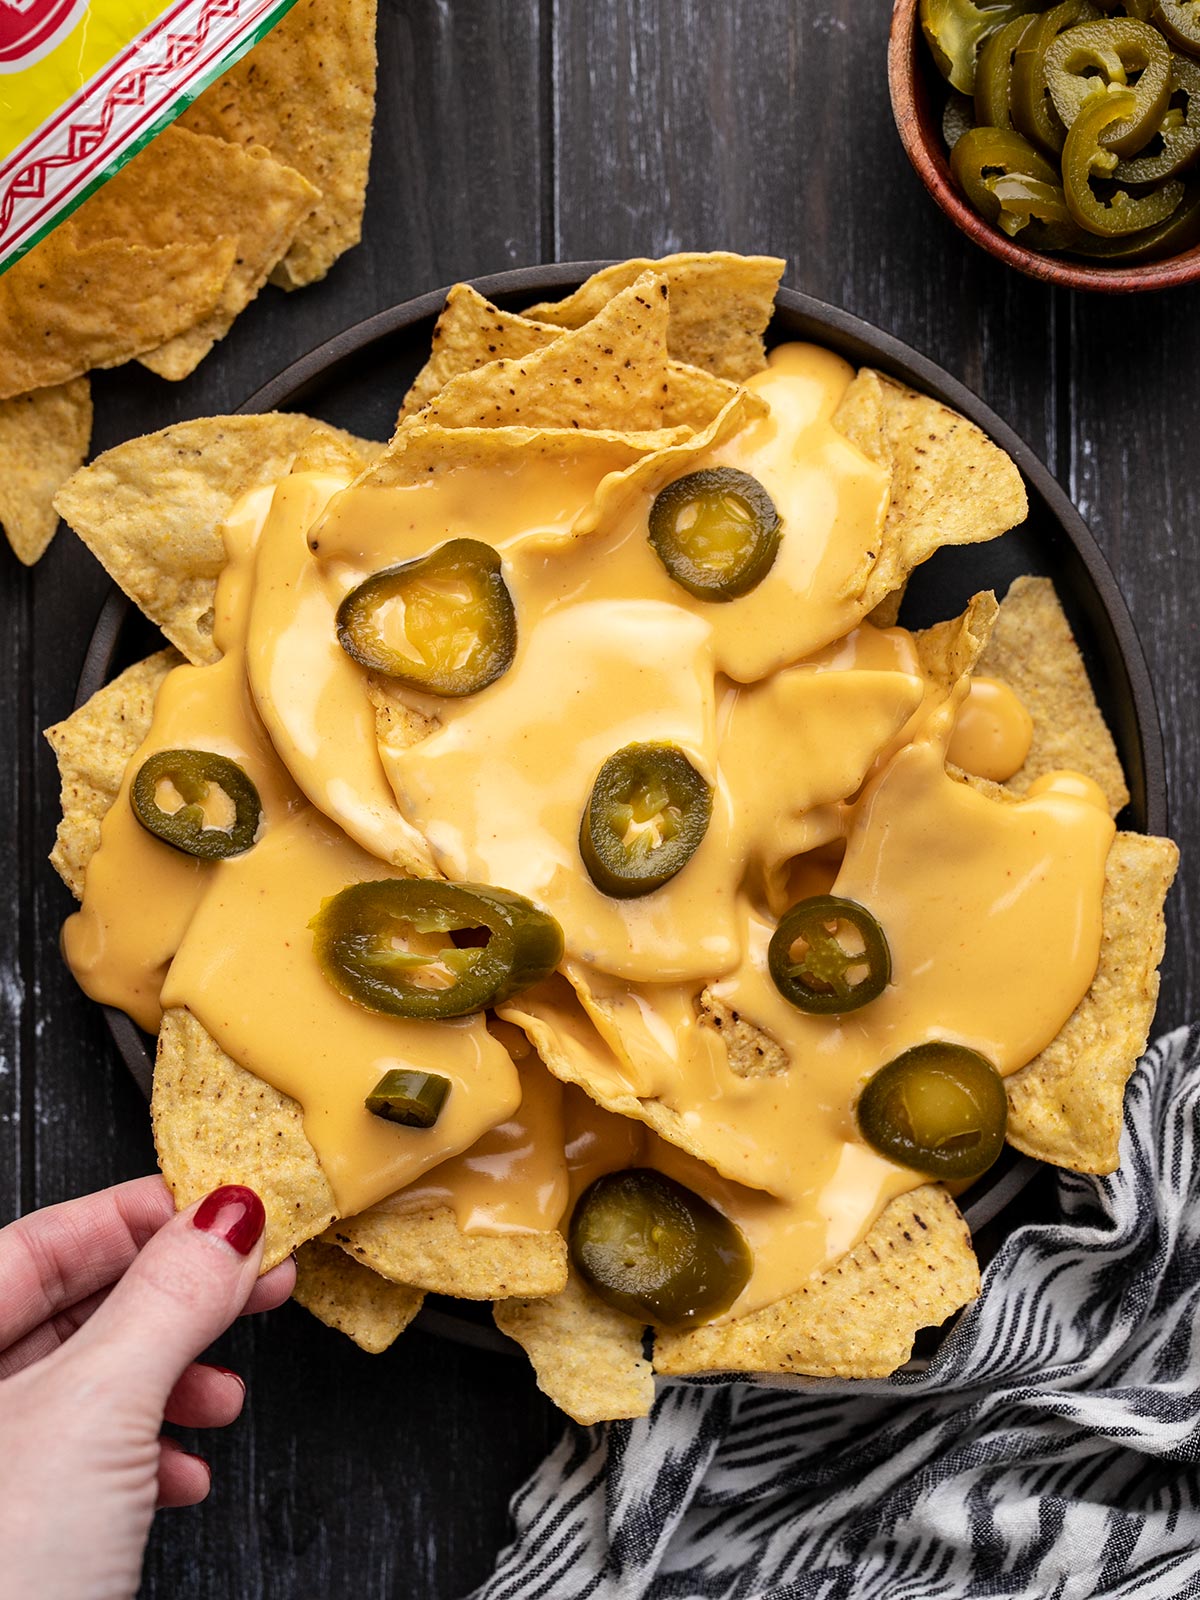 A plate of nachos with pickled jalapeño and a hand taking one chip.